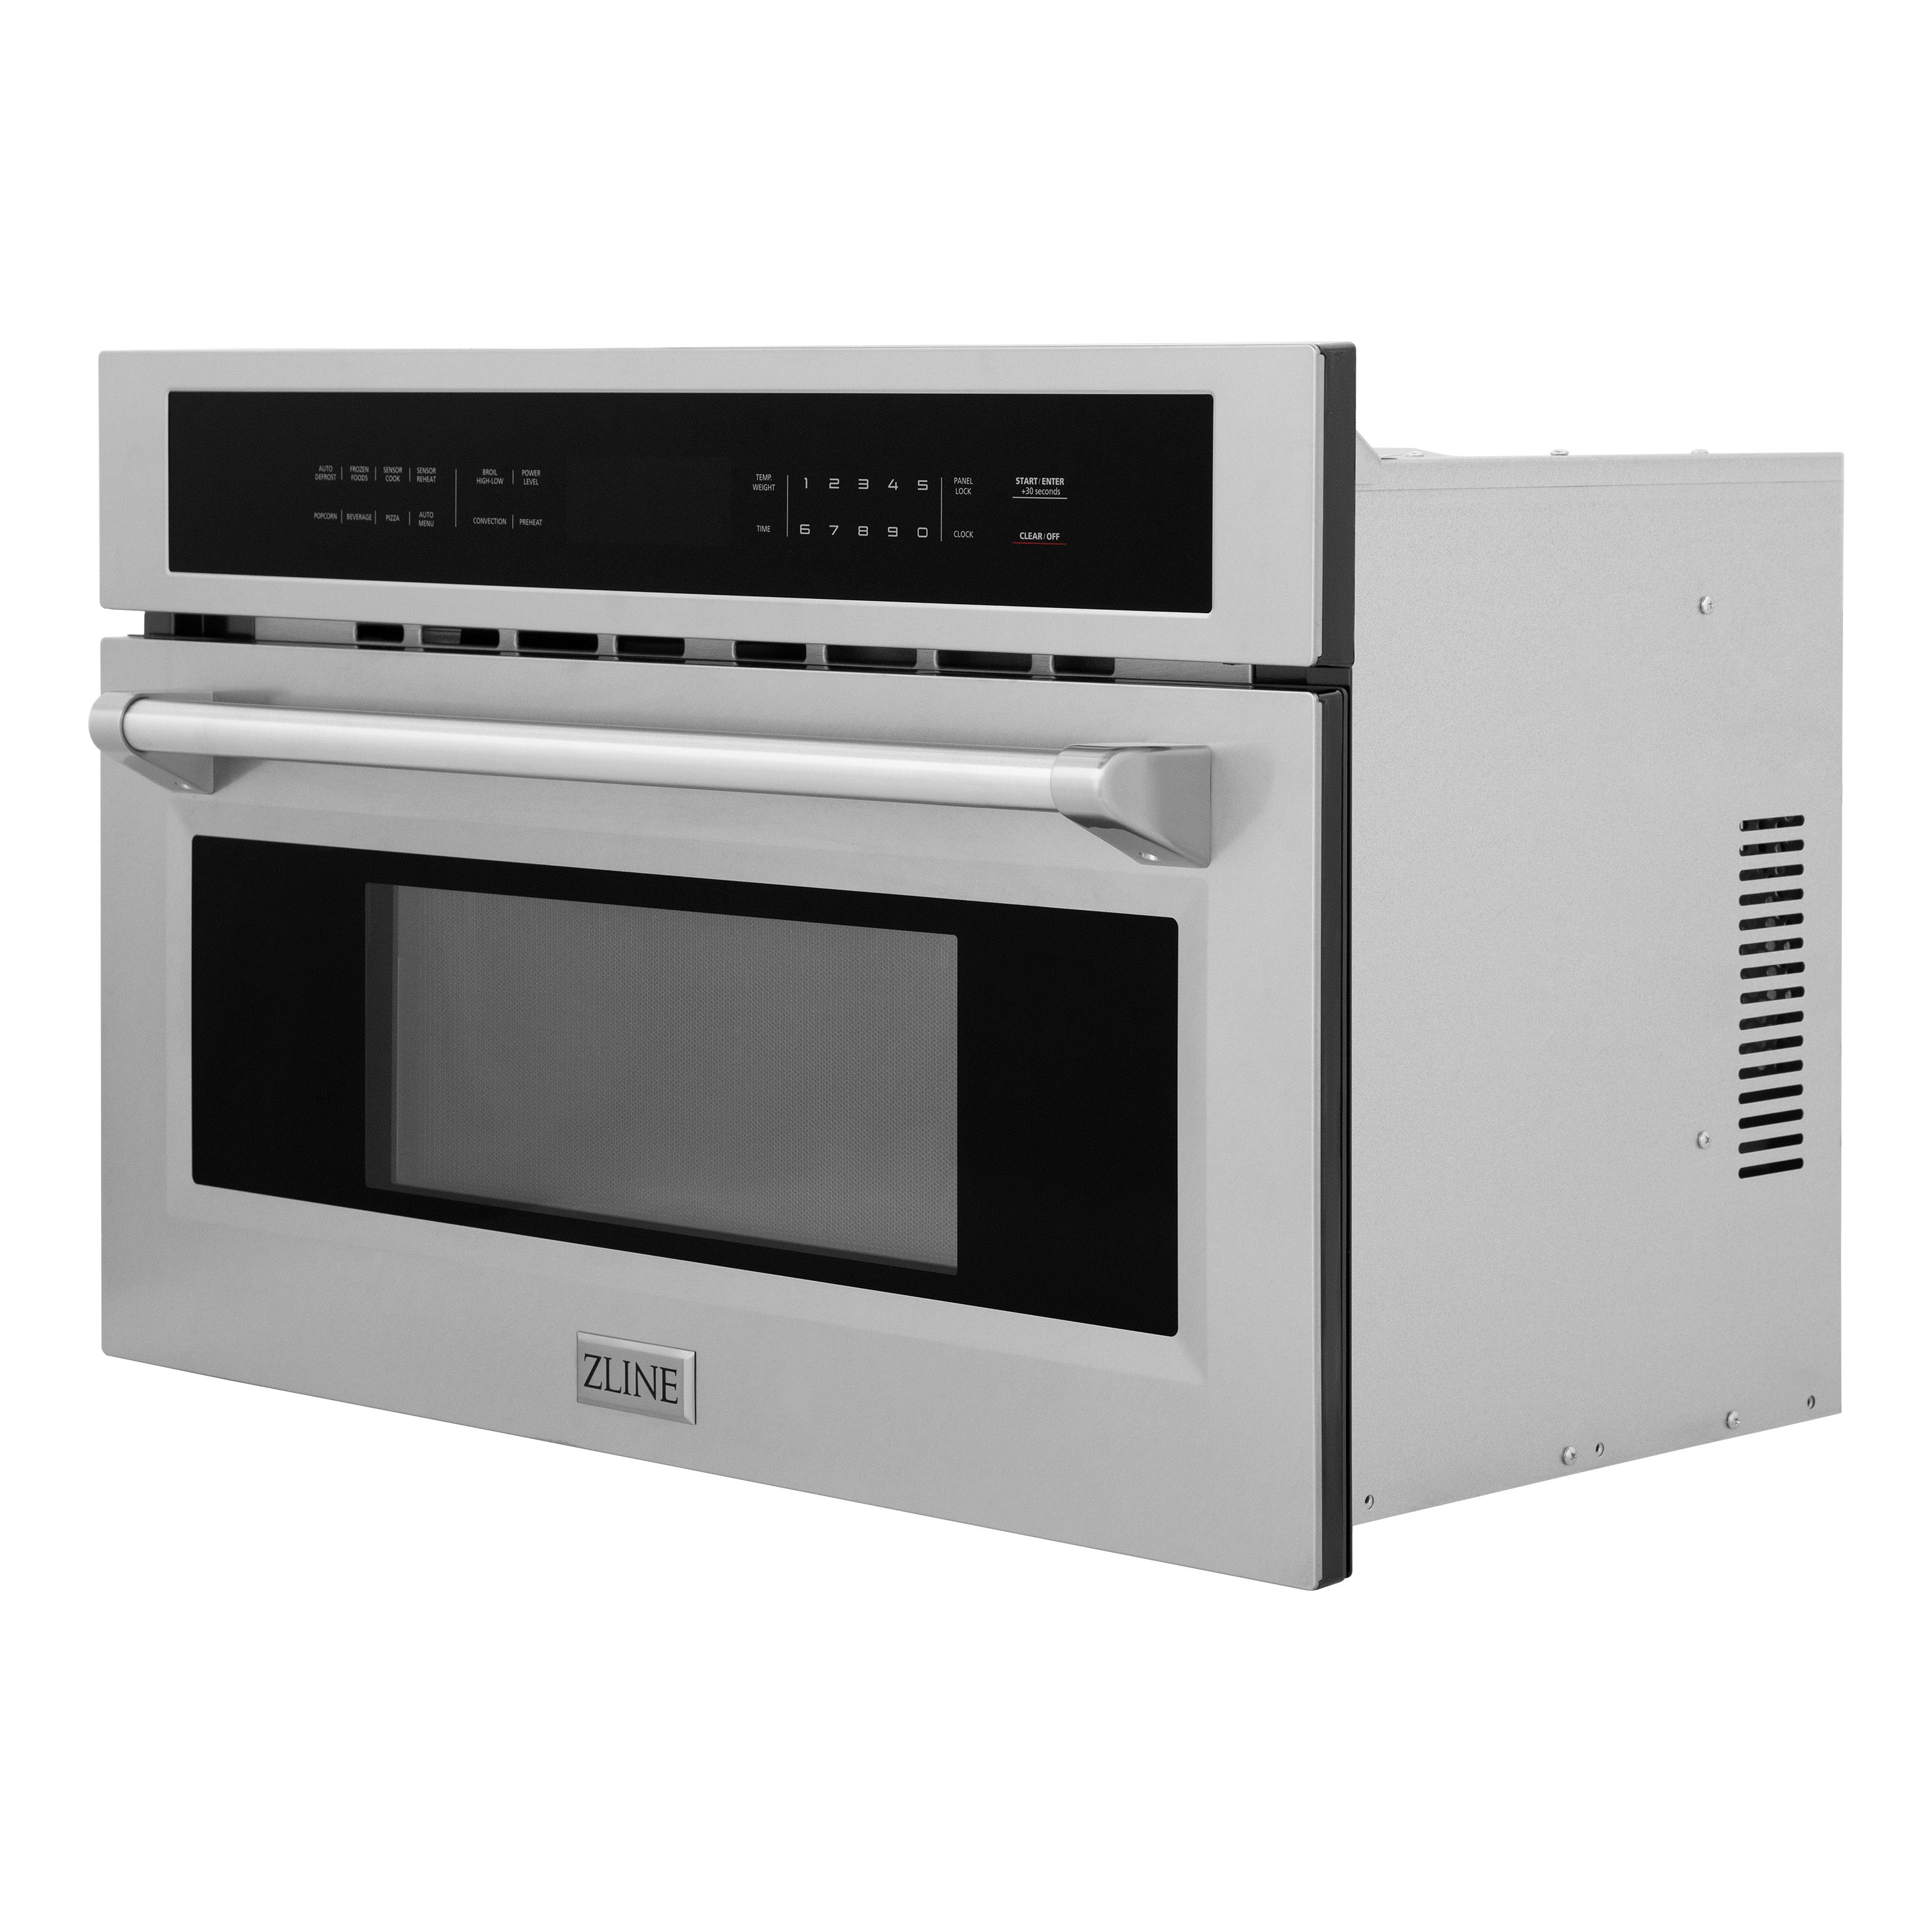 ZLINE 30” 1.6 cu ft. Built-in Convection Microwave Oven in Stainless Steel with Speed and Sensor Cooking